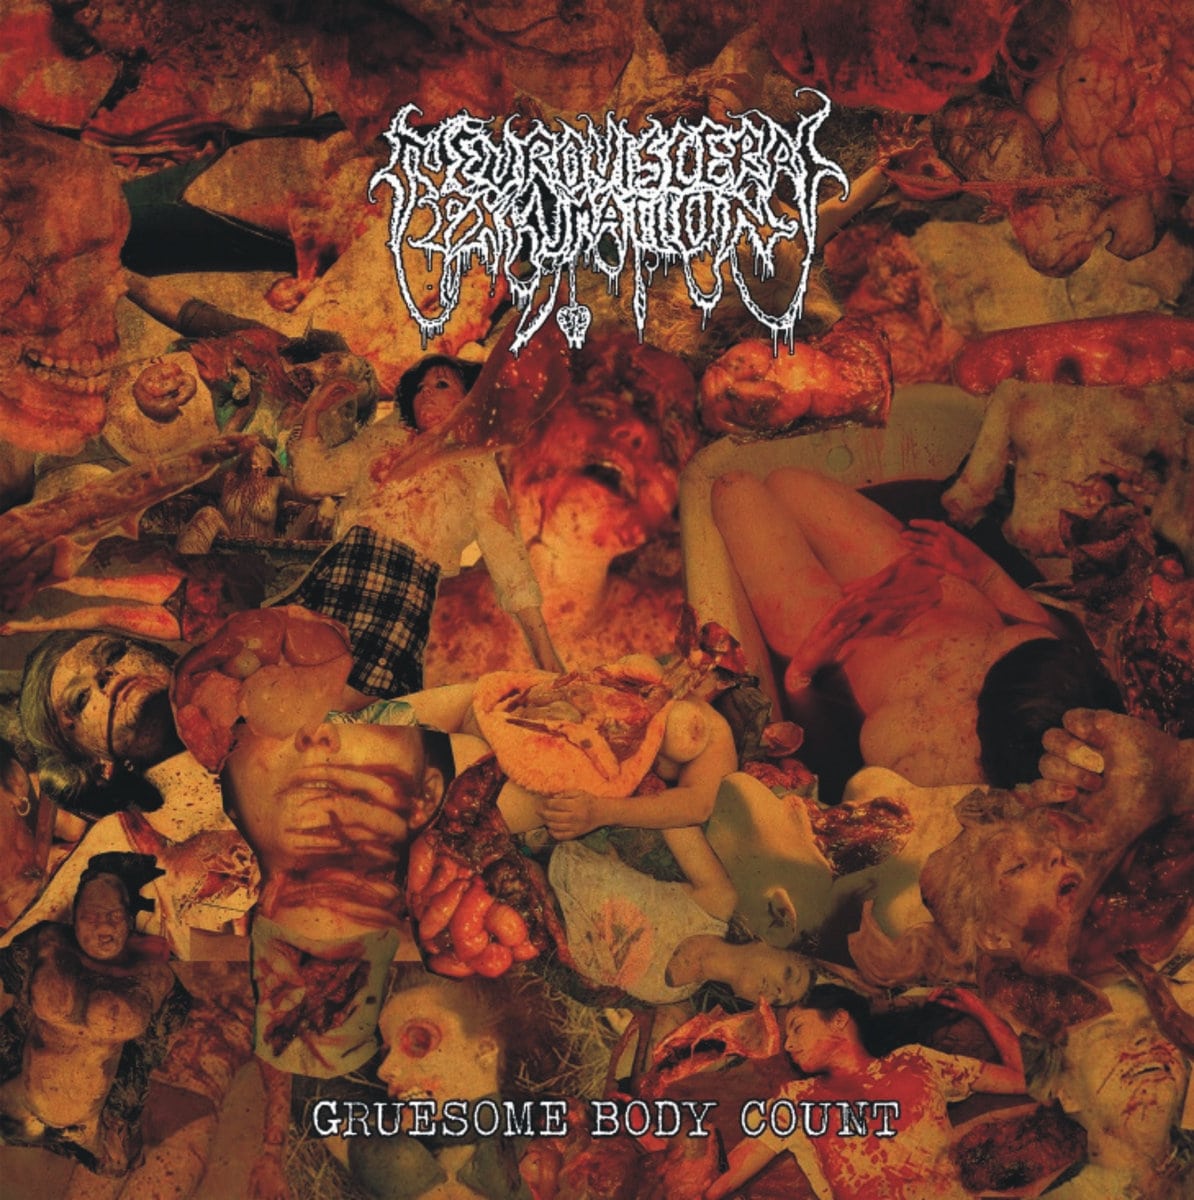 Neuro-Visceral-Exhumation-Gruesome-Body-Count-min